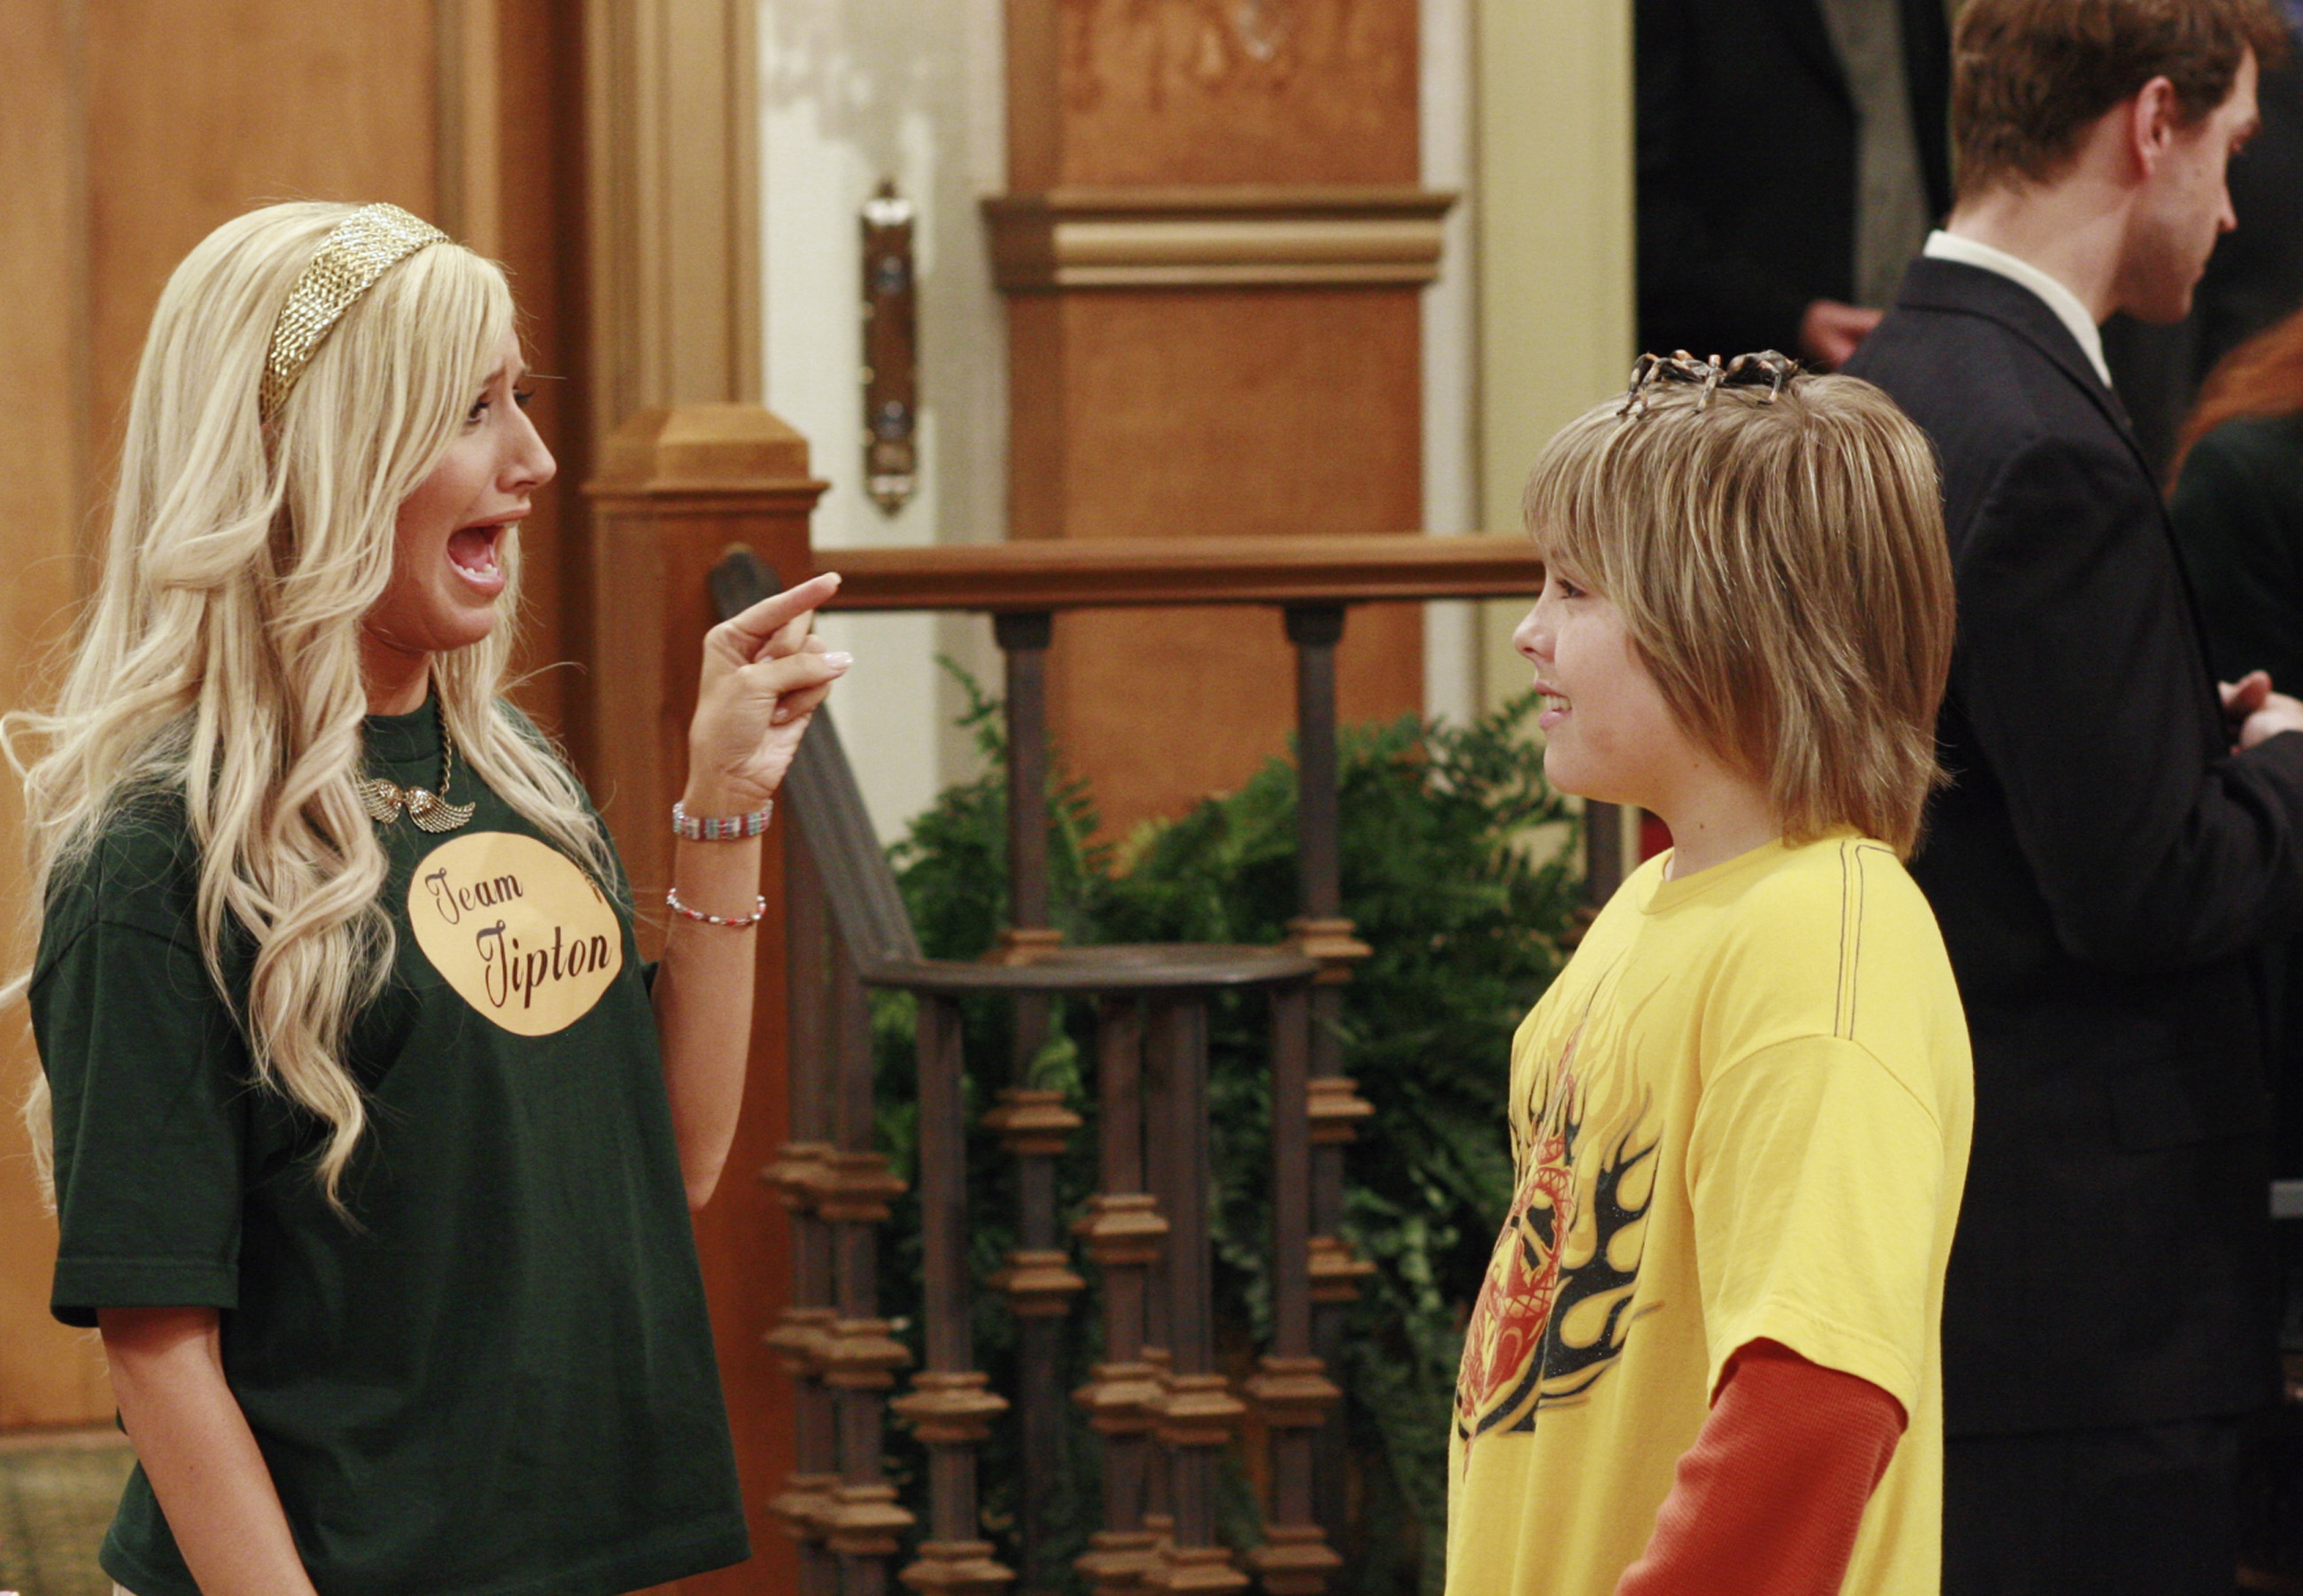 Dylan Sprouse in The Suite Life of Zack and Cody (Season 3) - Picture...